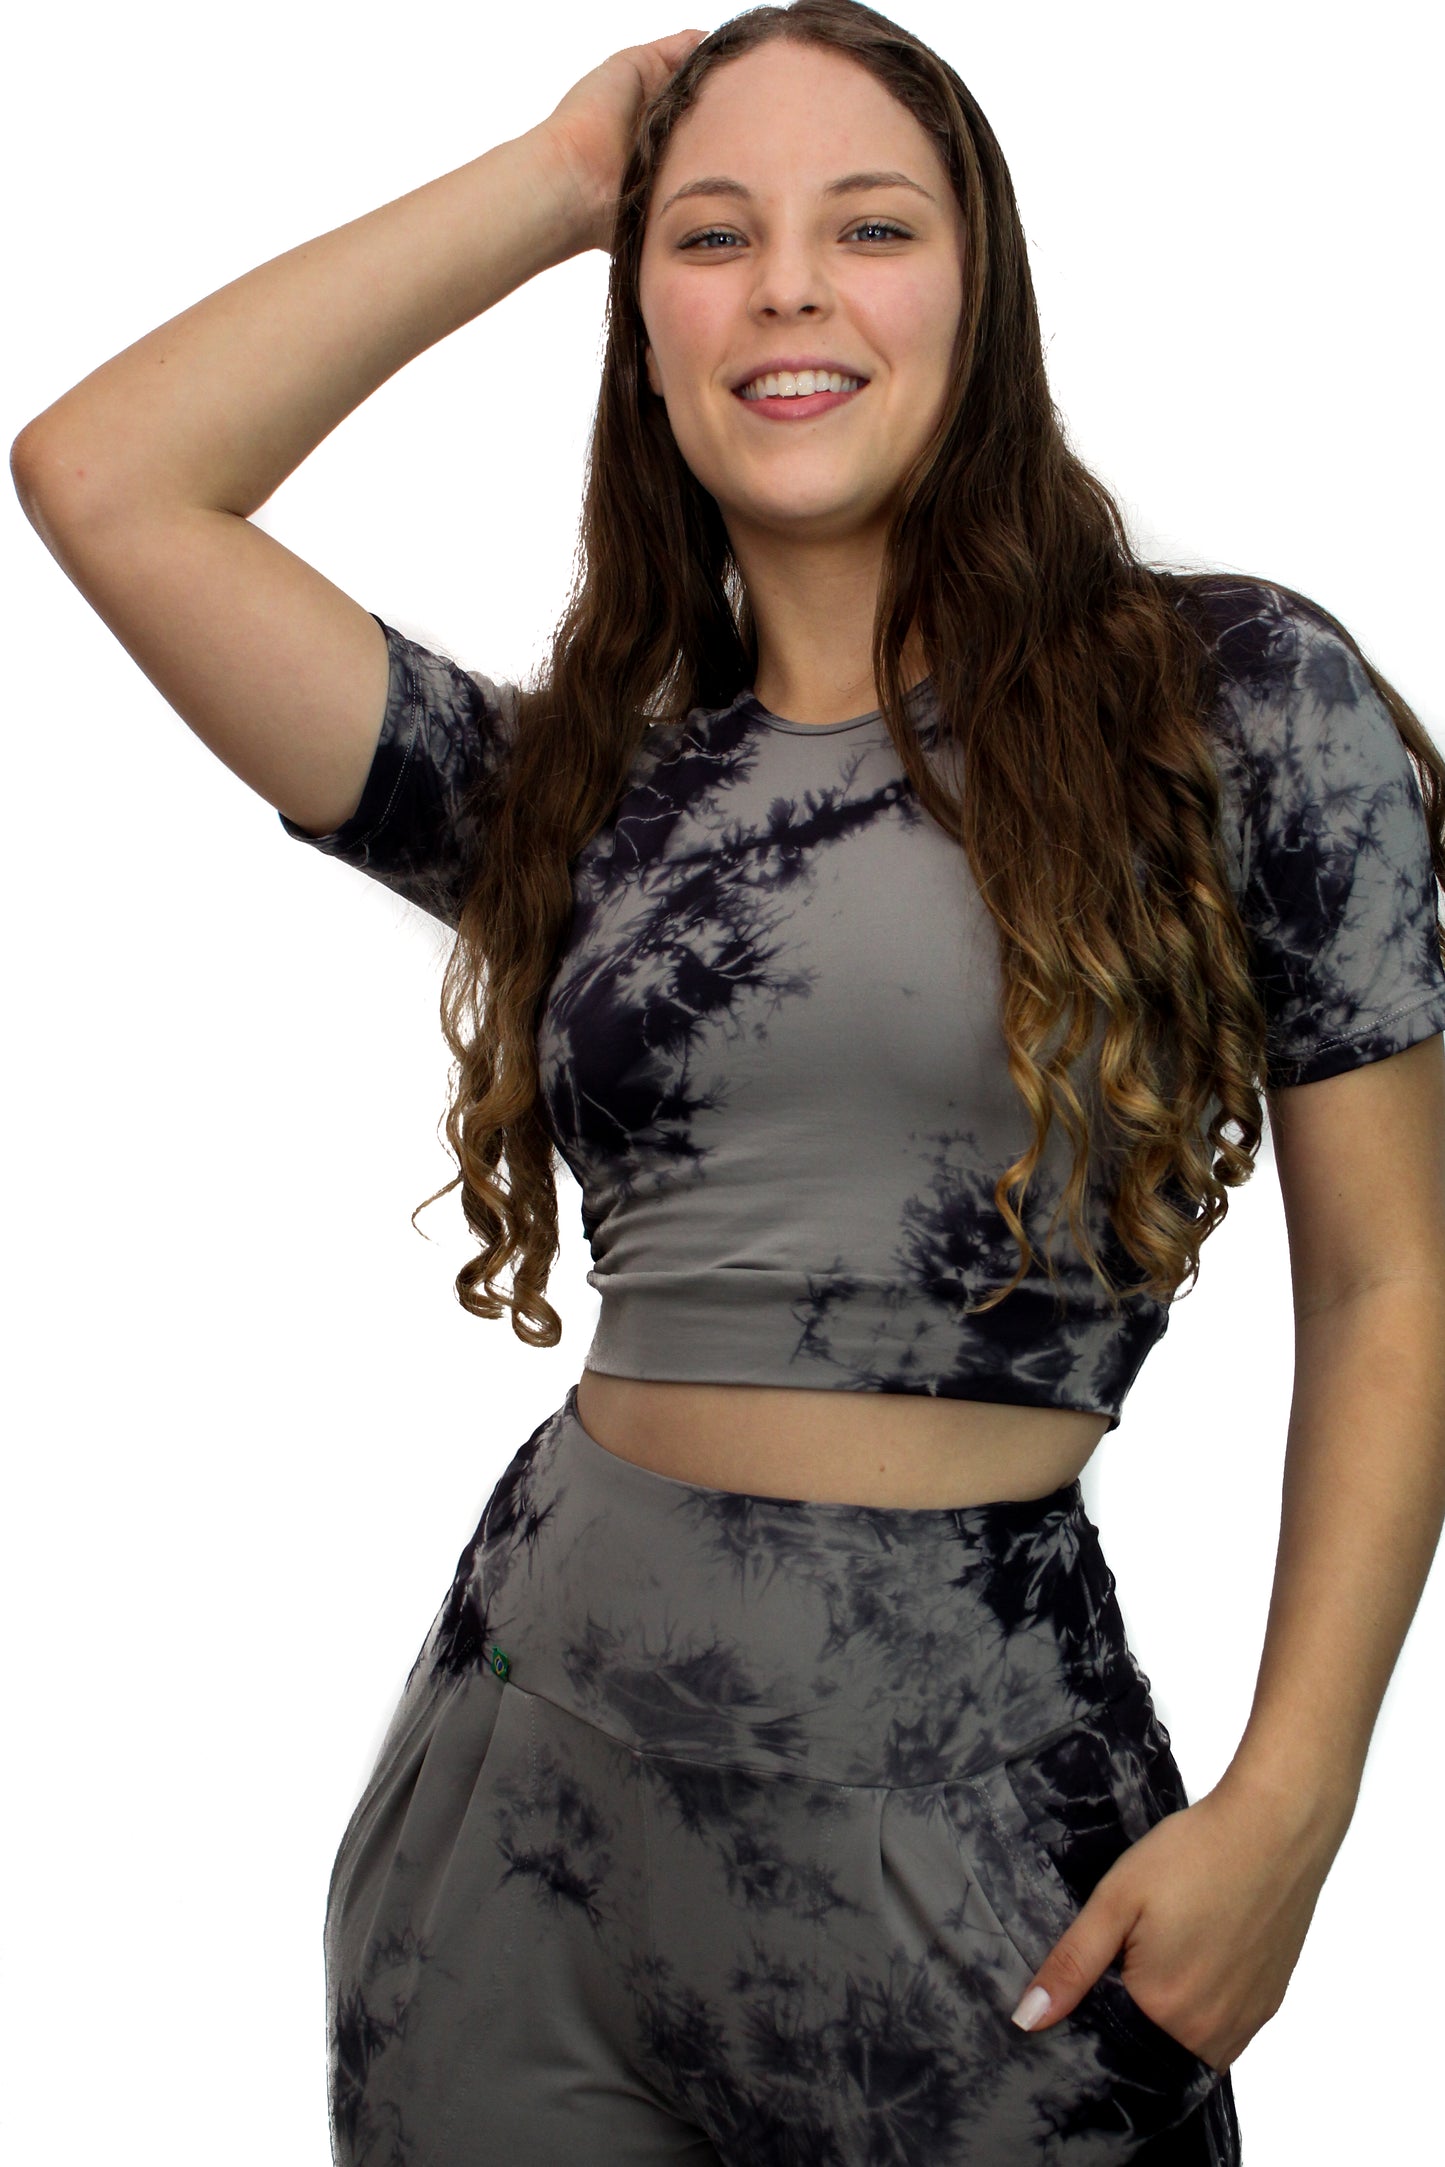 Classic Crop Short Sleeves - black and gray Tie Dye